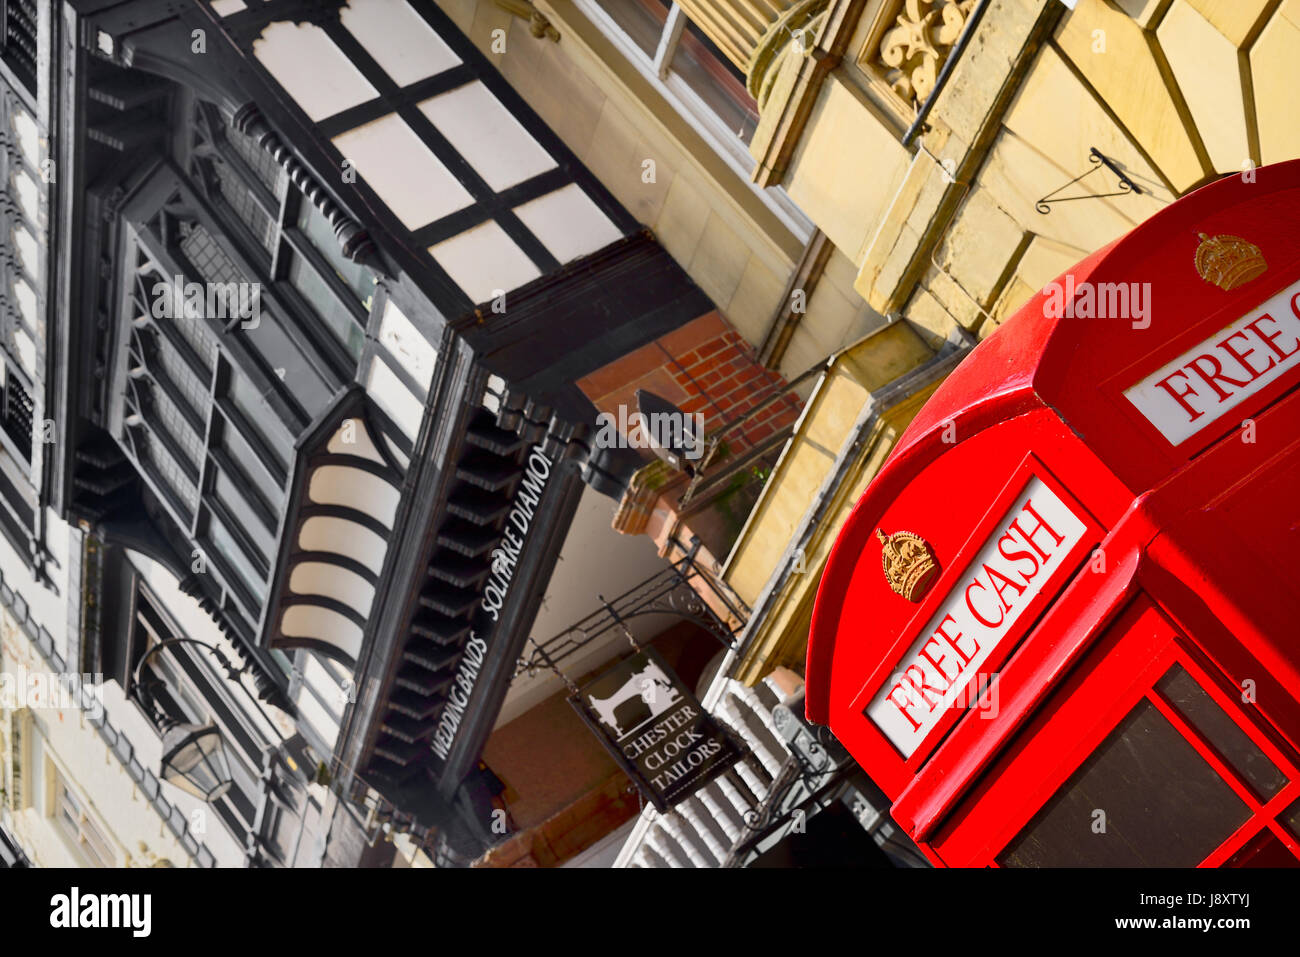 England, Cheshire, Chester, Iconic red telephone box converted to ATM on Eastgate Street with black and white architecture behind. Stock Photo